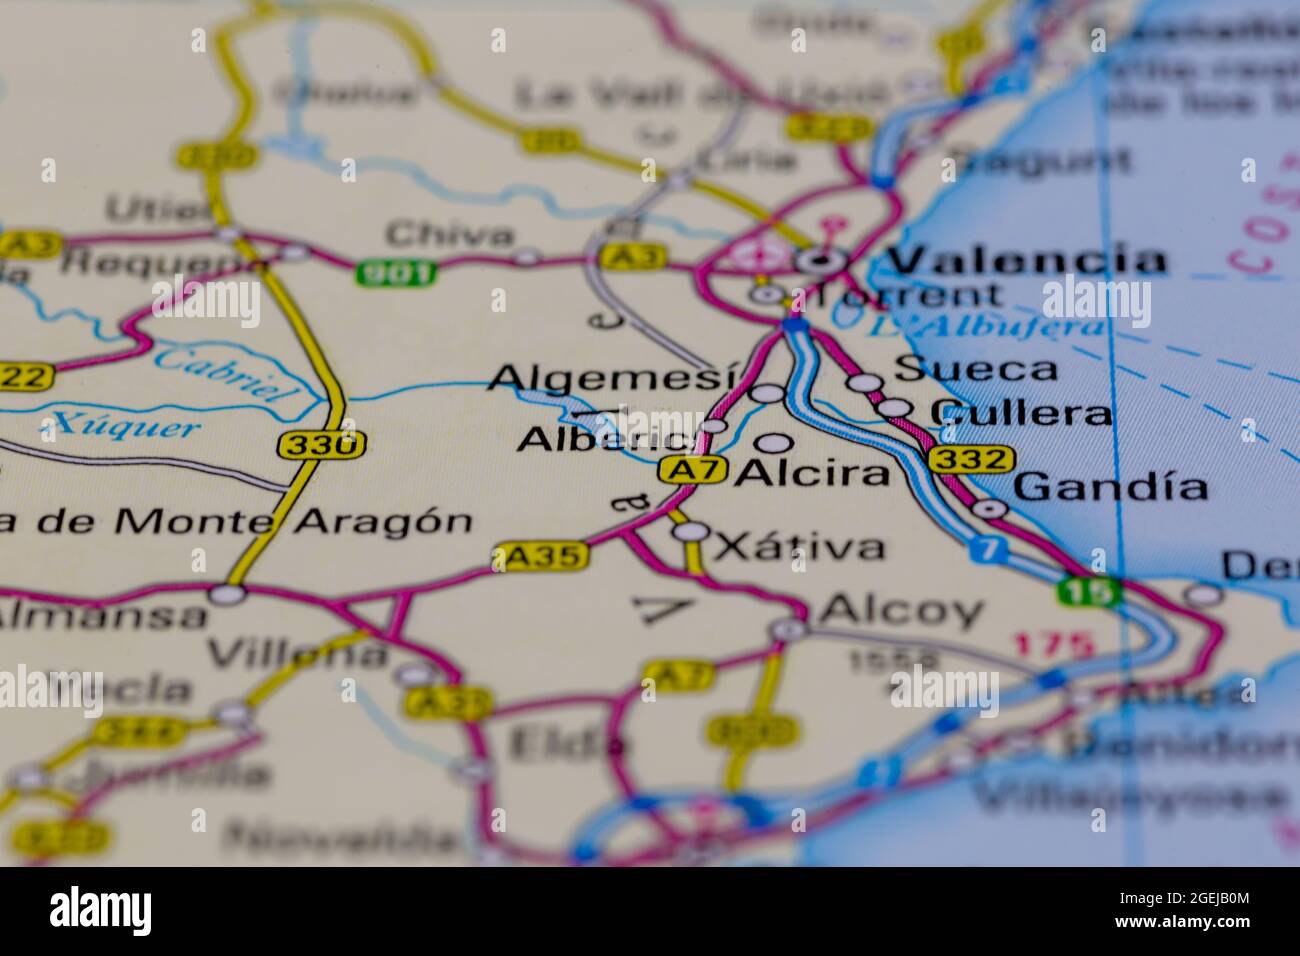 Alberic Spain shown on a road map or Geography map Stock Photo